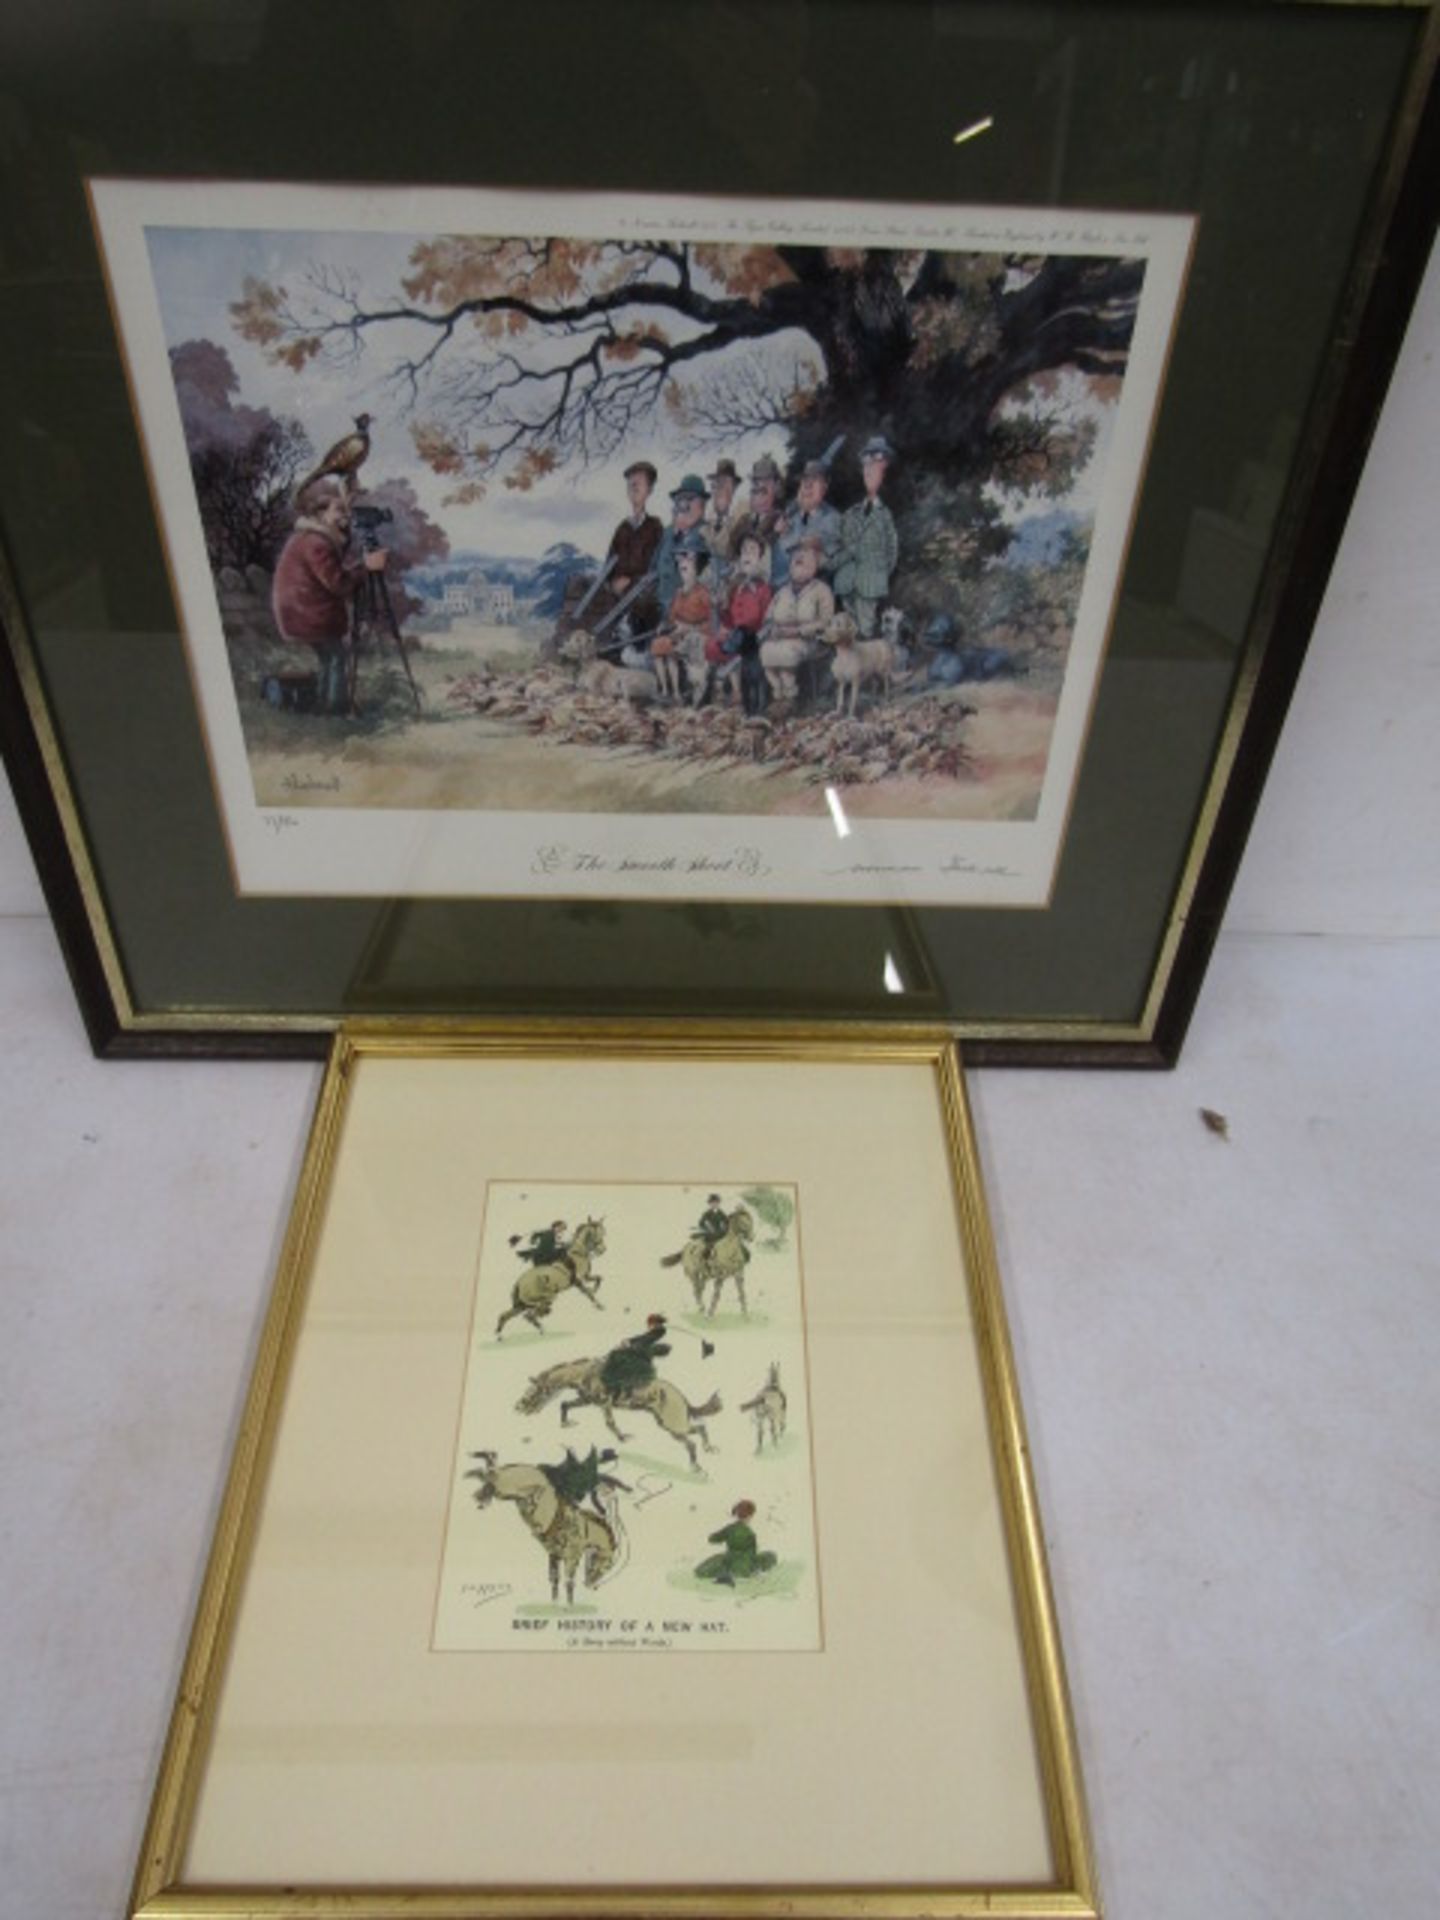 Thelwell ltd edtion print 'The Smooth Shoot' pencil signed in margin and a comical sporting print